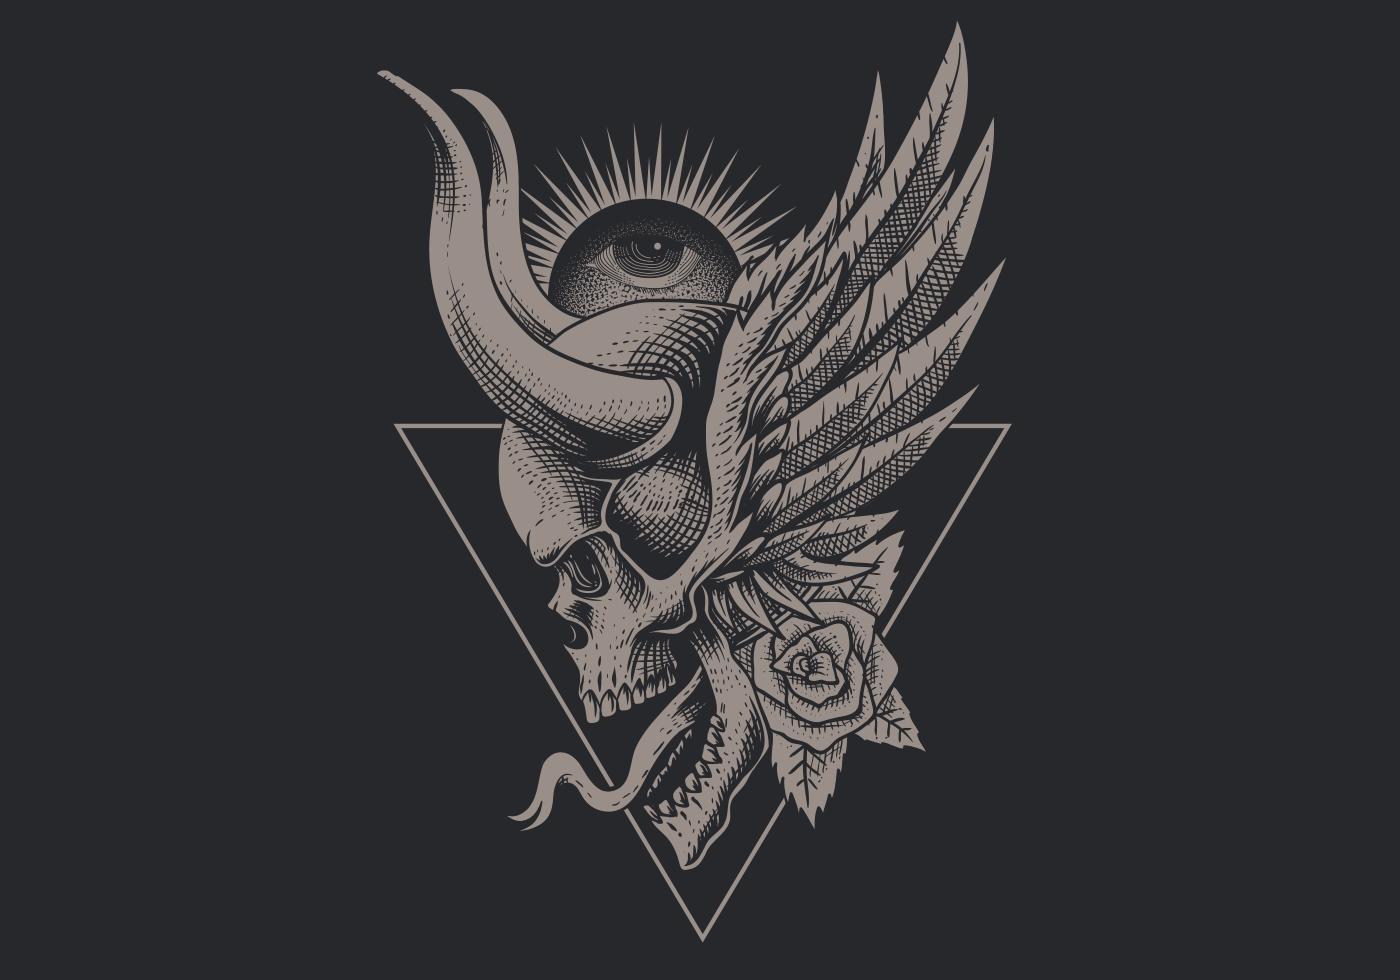 Winged vintage skull with horns over upside down triangle vector